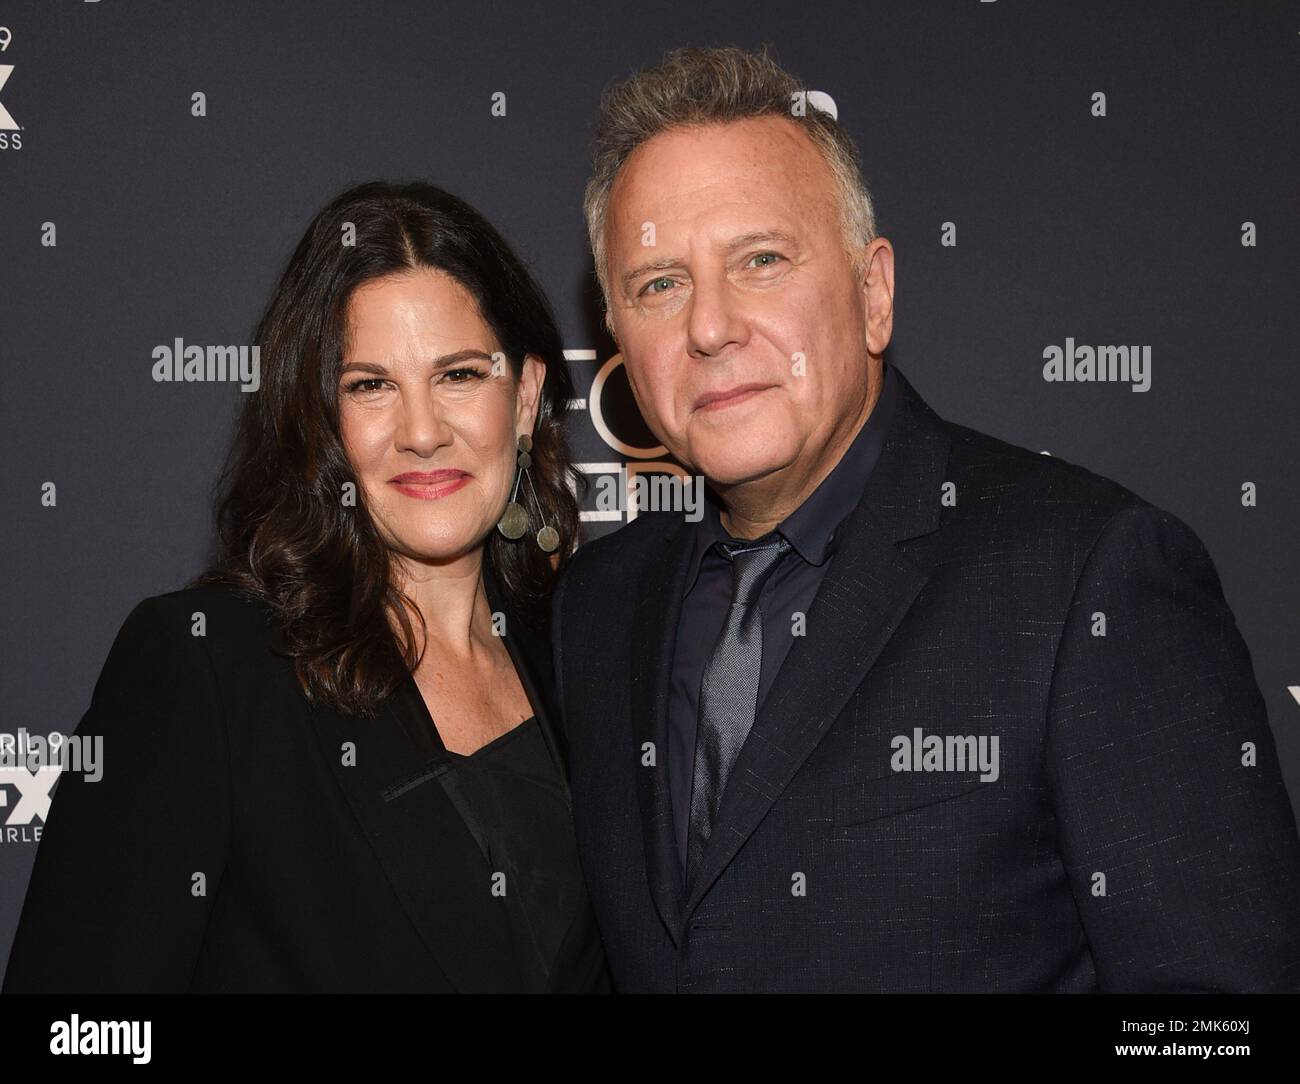 Actor Paul Reiser and wife Paula attend the premiere screening of FX's  "Fosse/Verdon" at the Gerald Schoenfeld Theatre on Monday, April 8, 2019,  in New York. (Photo by Evan Agostini/Invision/AP Stock Photo -